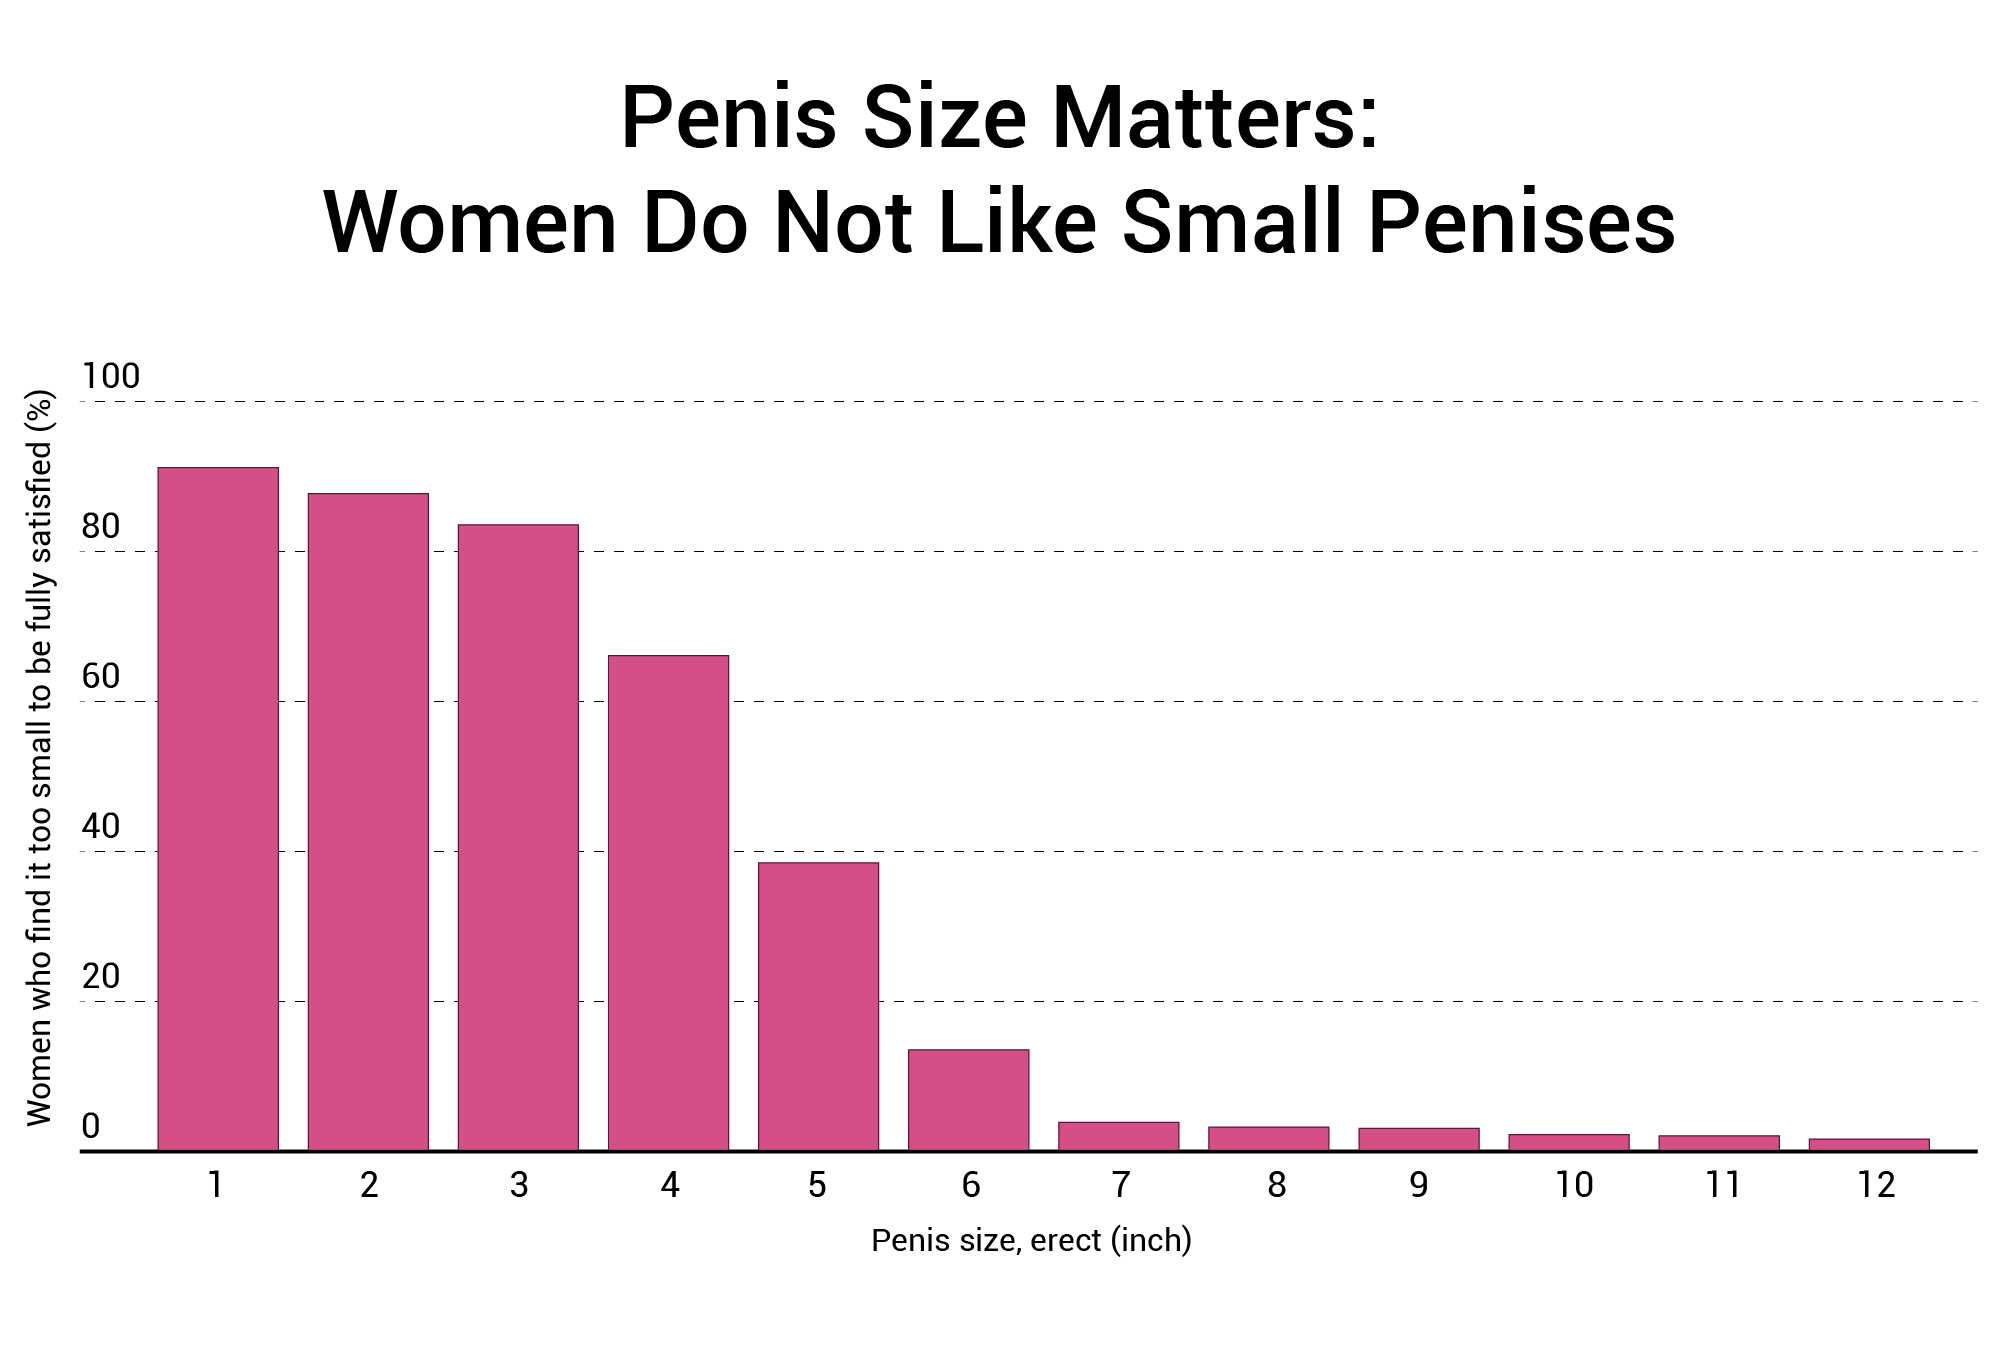 Does Size Matter? 91.7% Of Women Say It Does 1,387 Woman Study